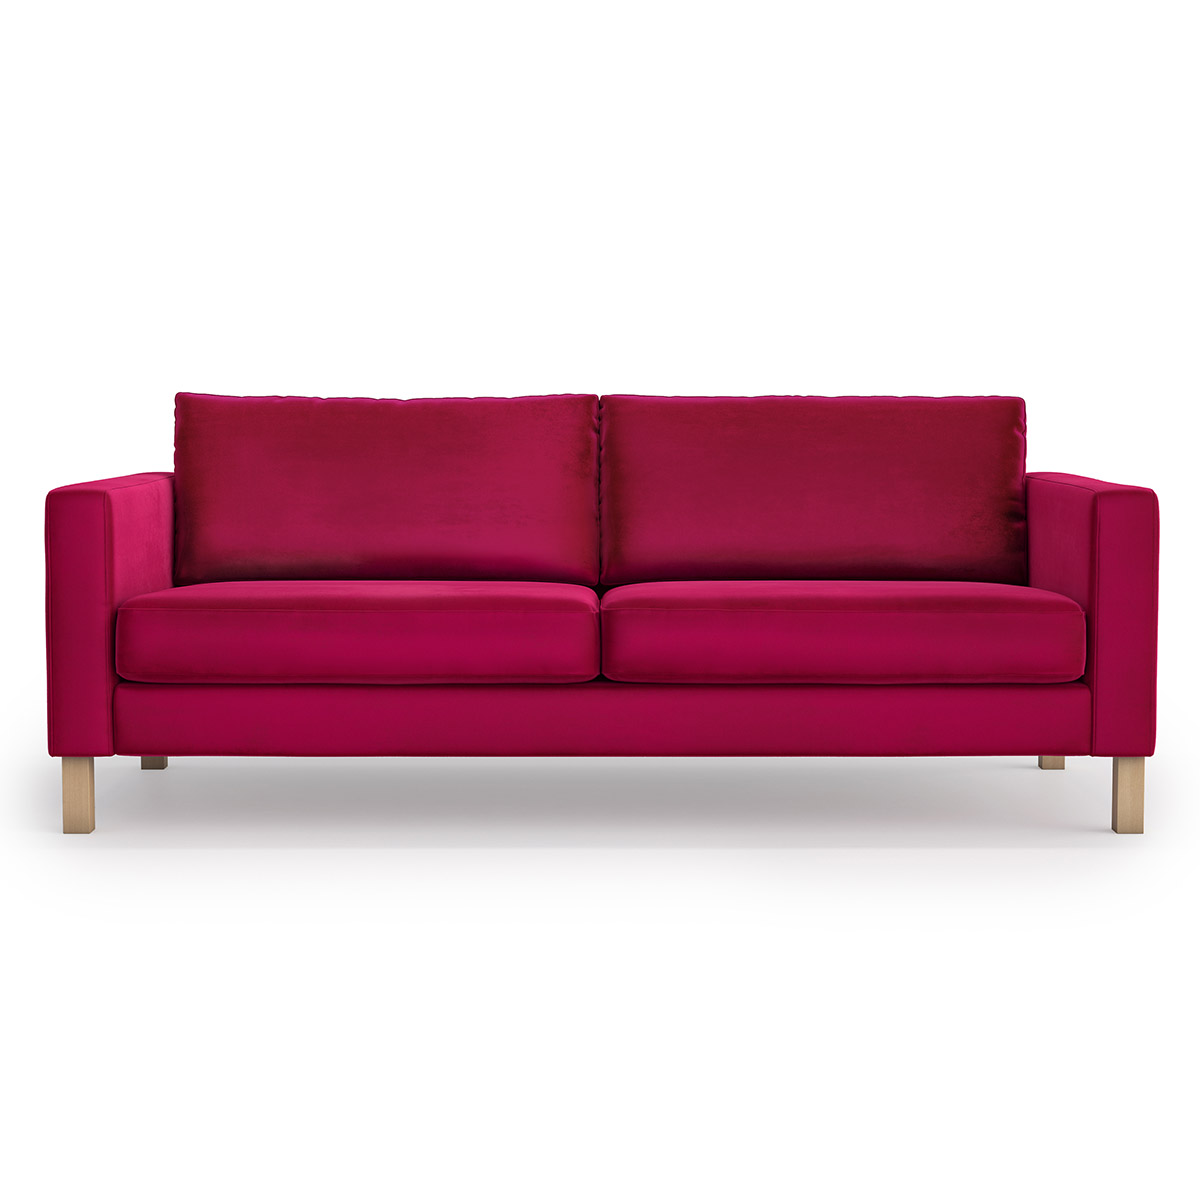 Outlet Karlstad 3 Seater Sofa Cover